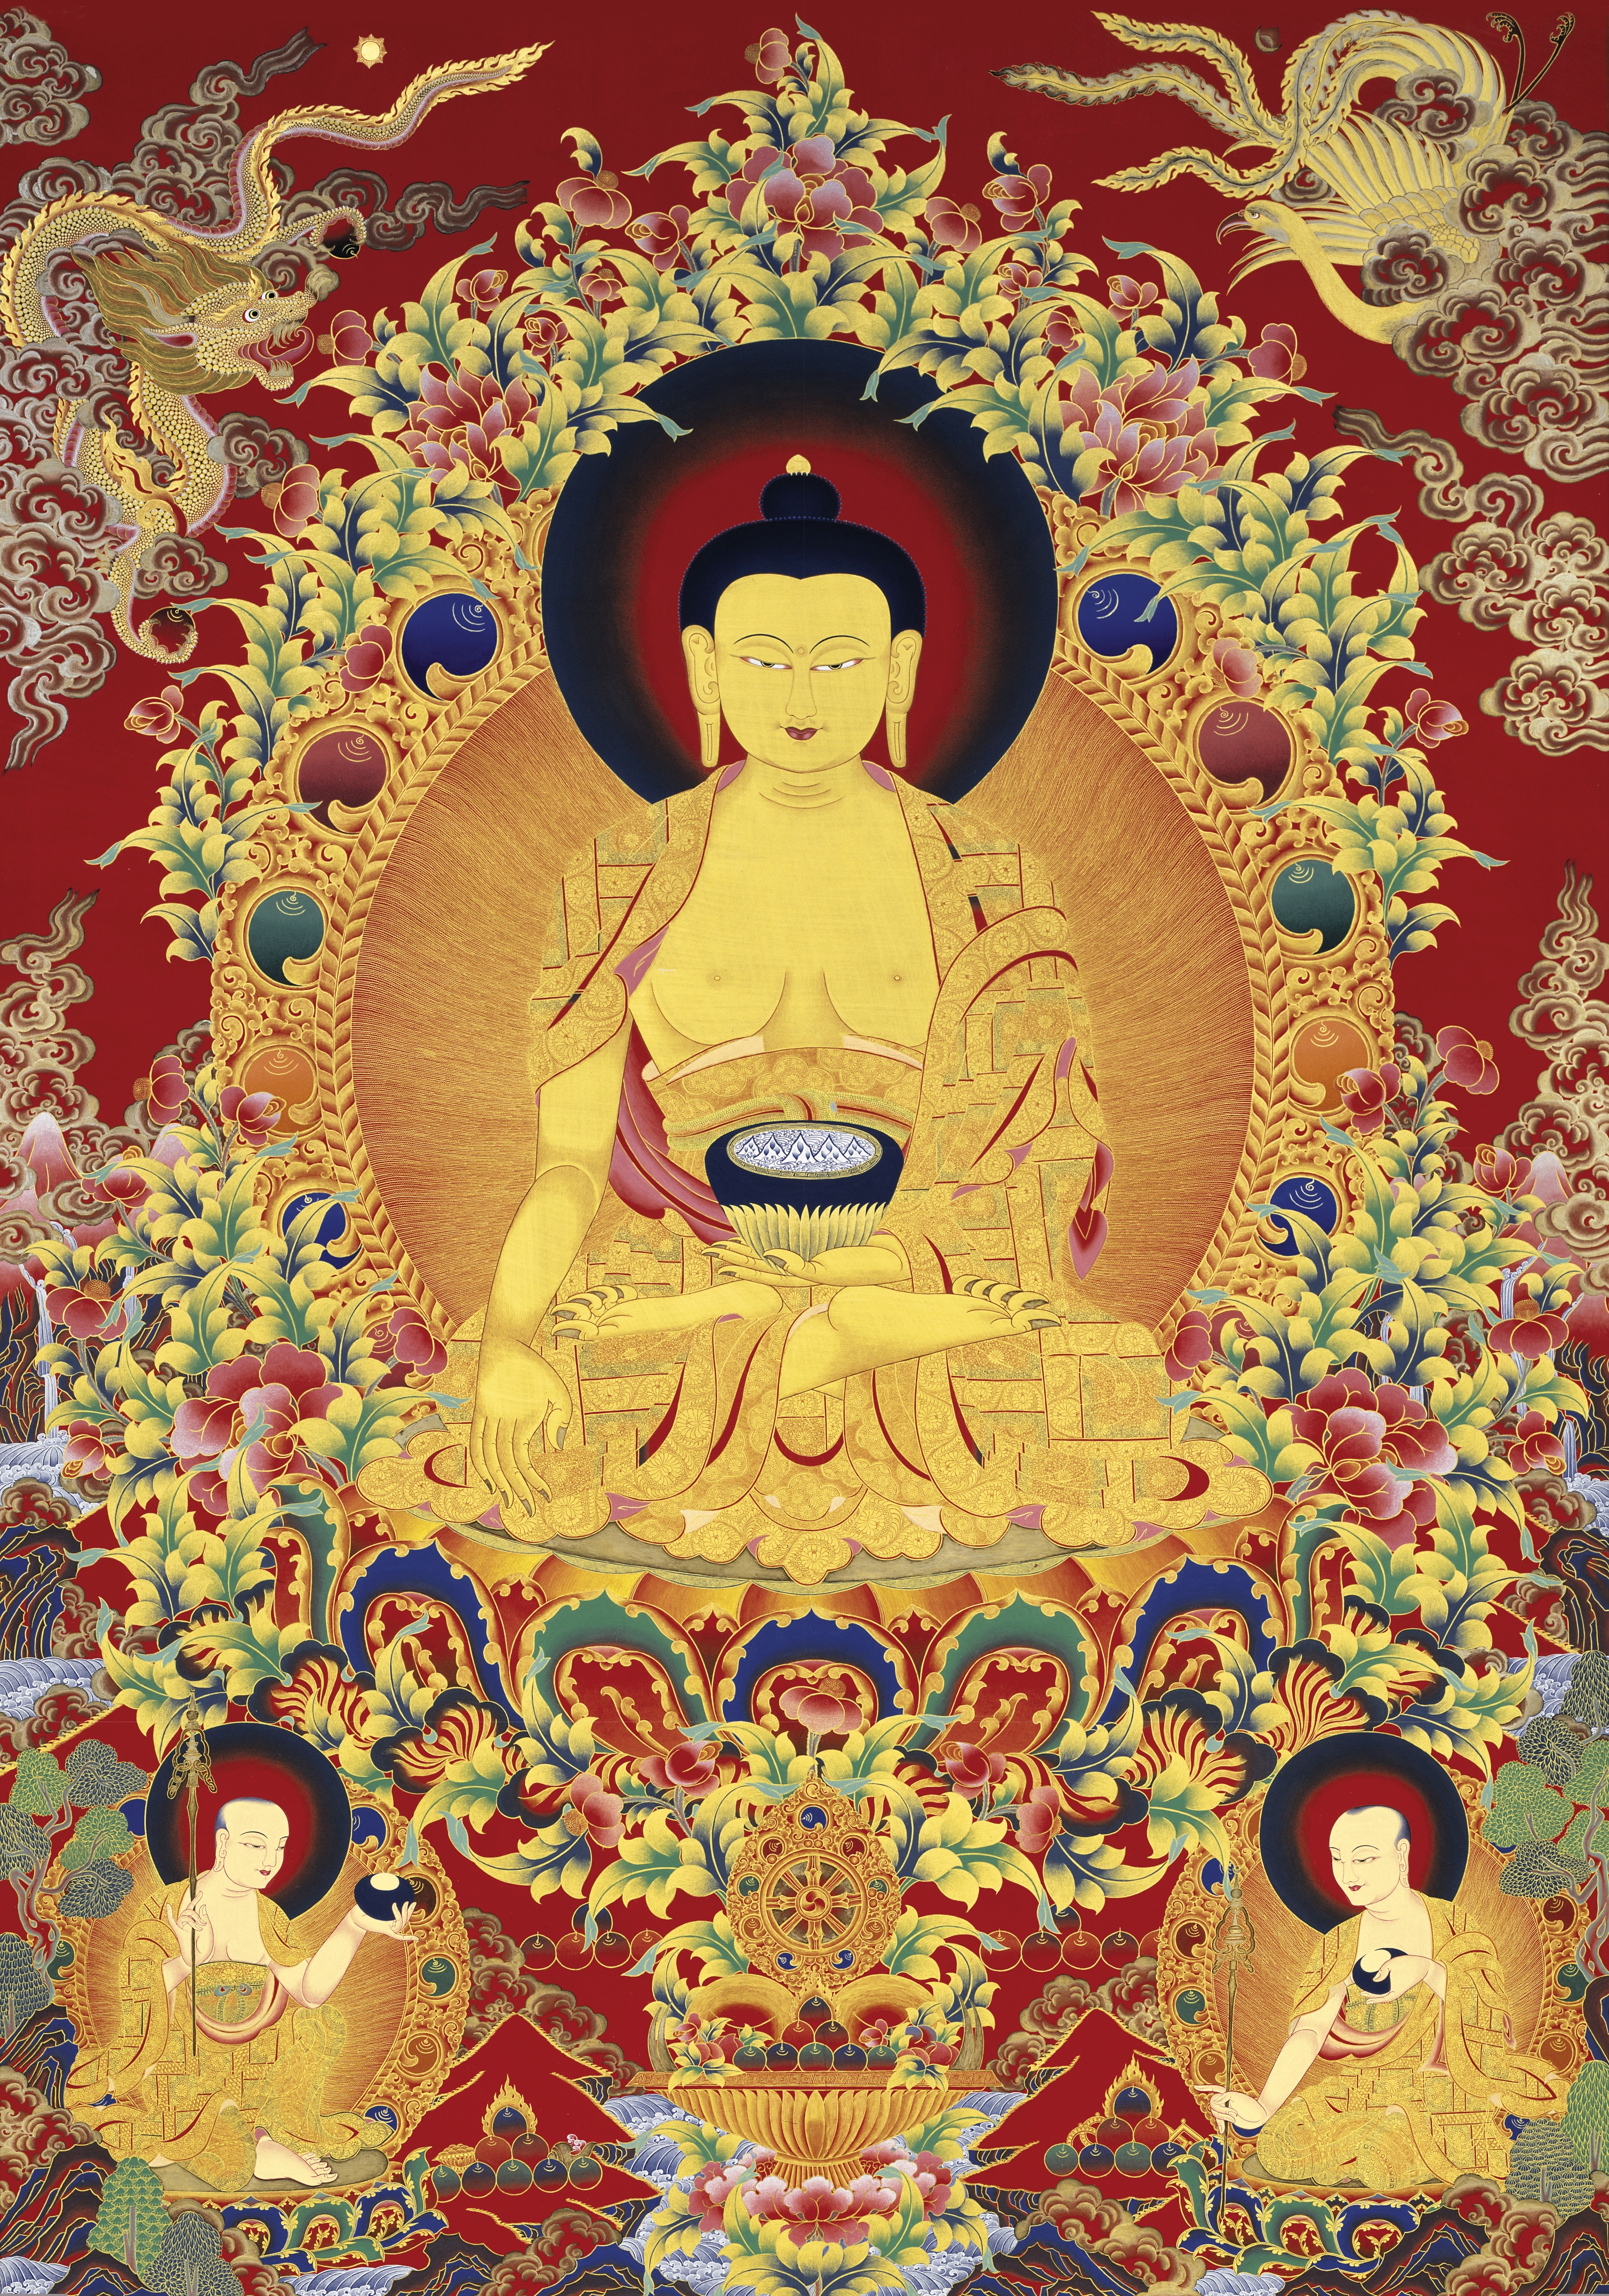 Painting of the Buddha